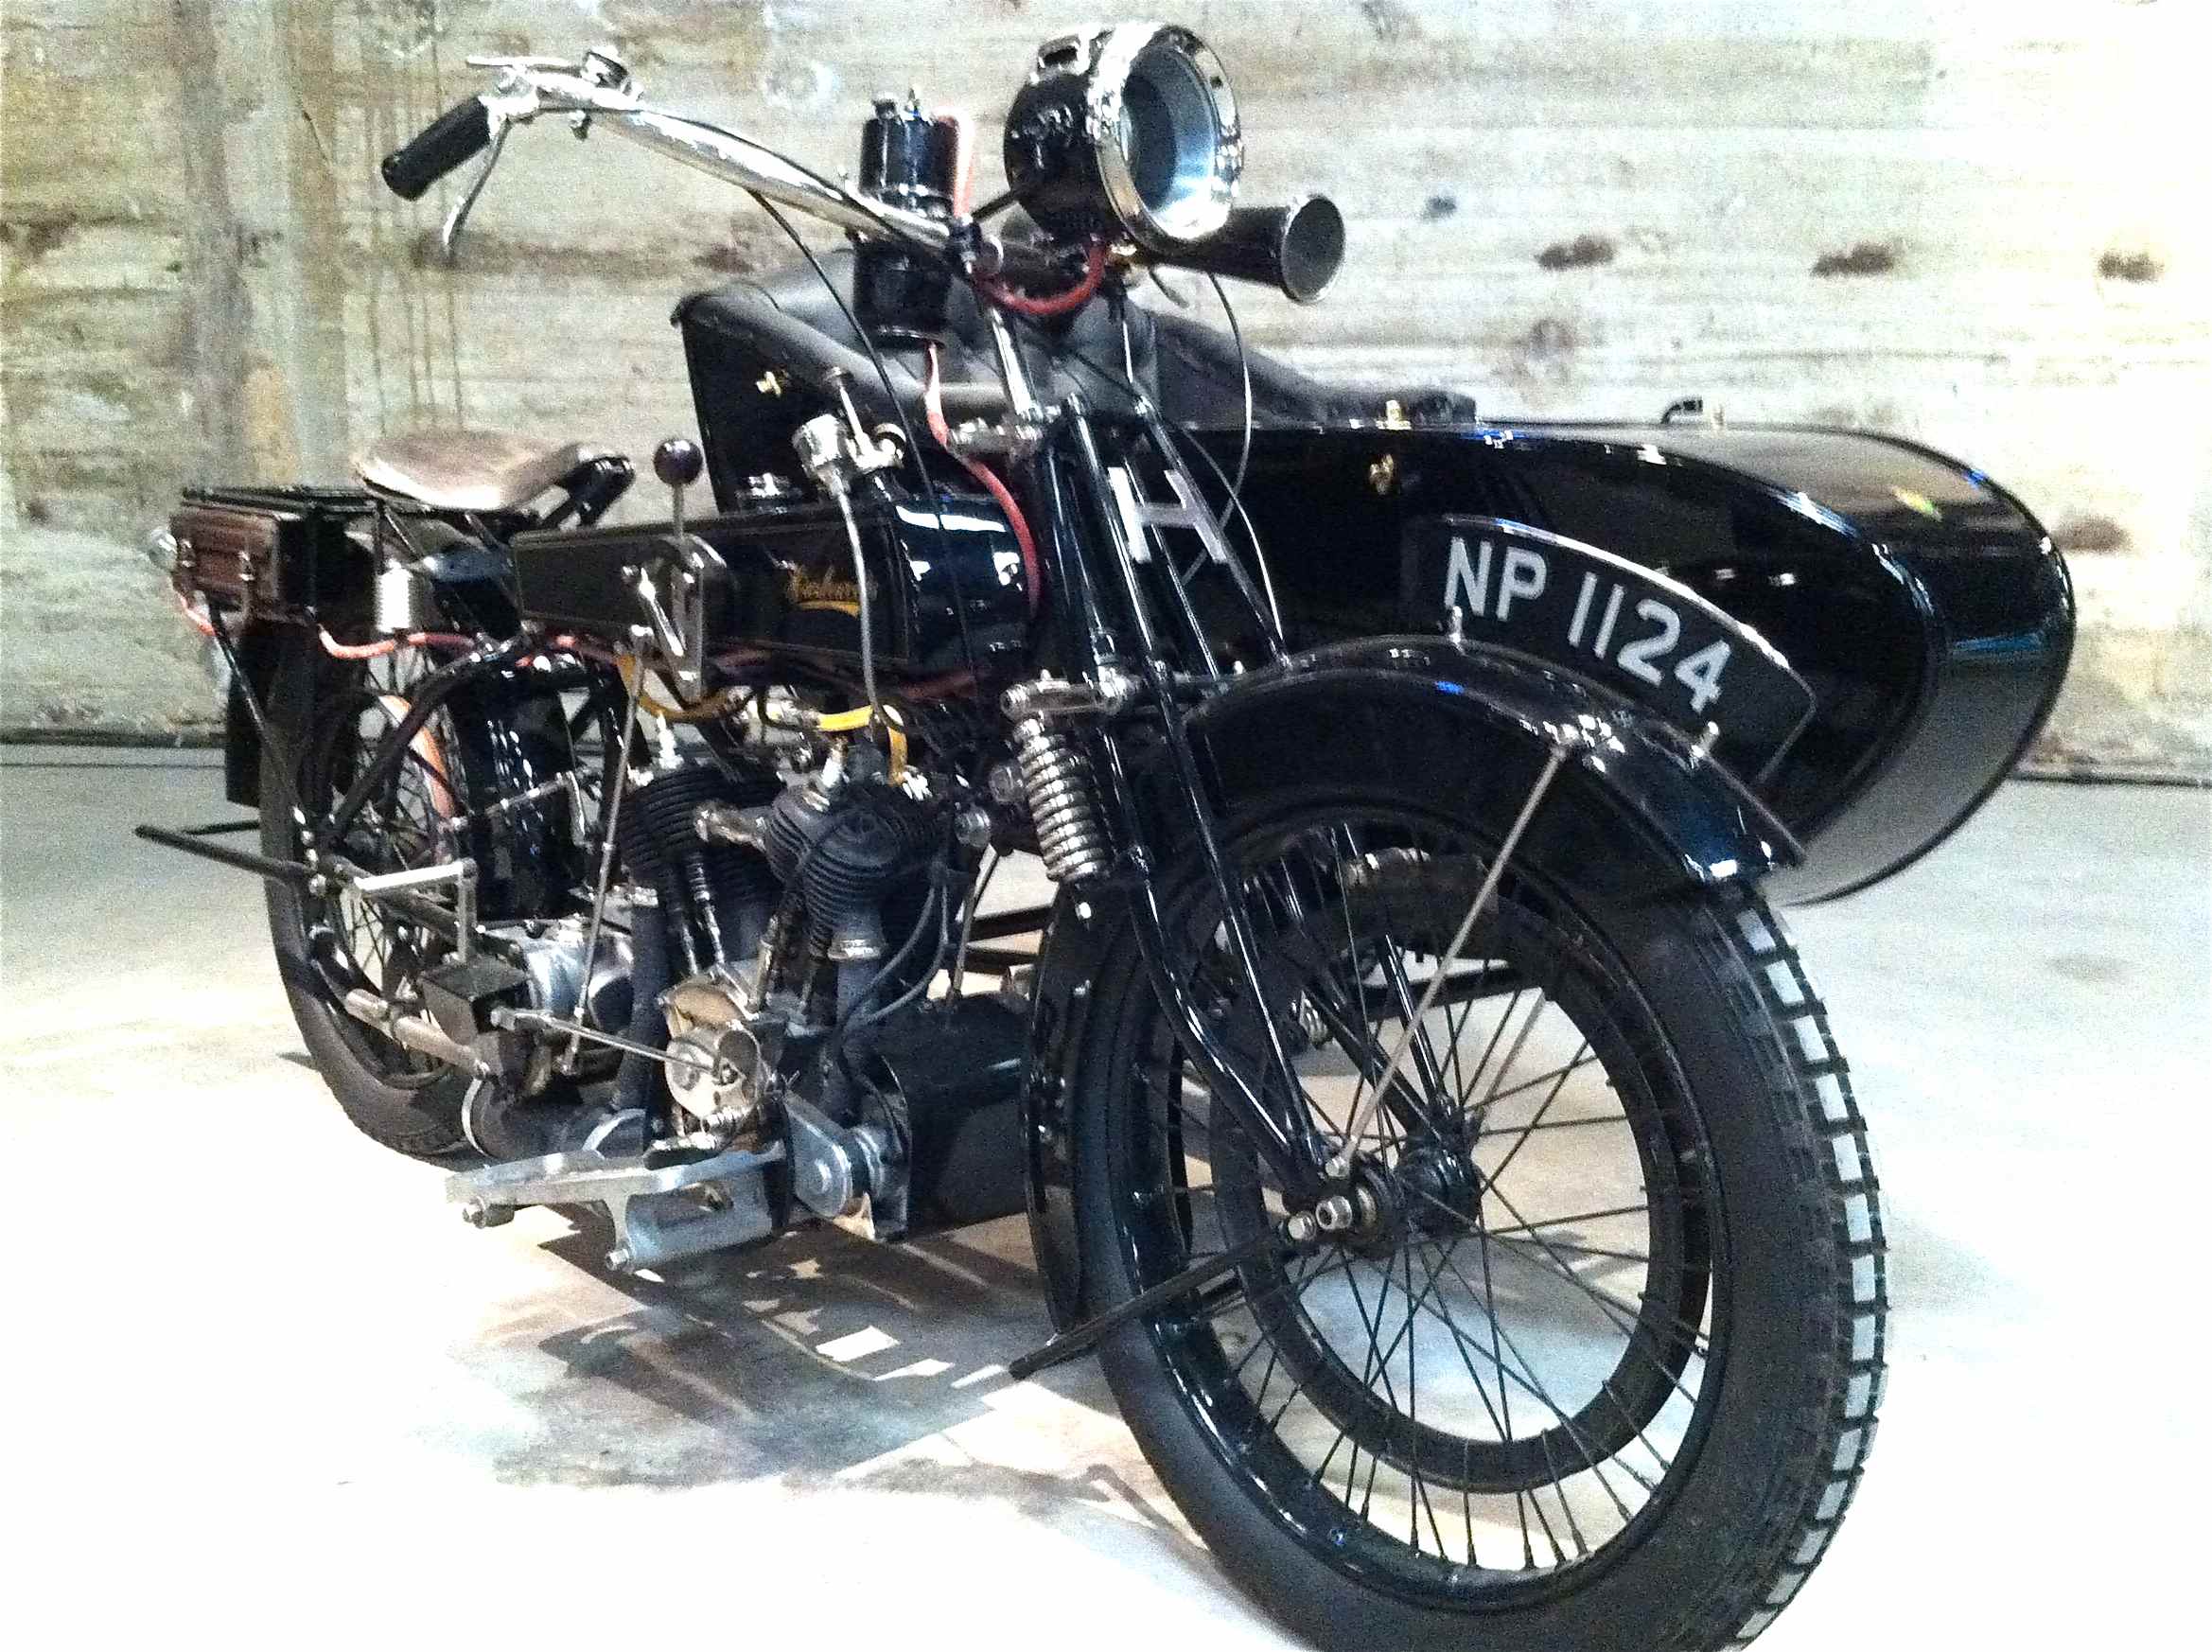 Hazelwood Motorcycle at Show 2